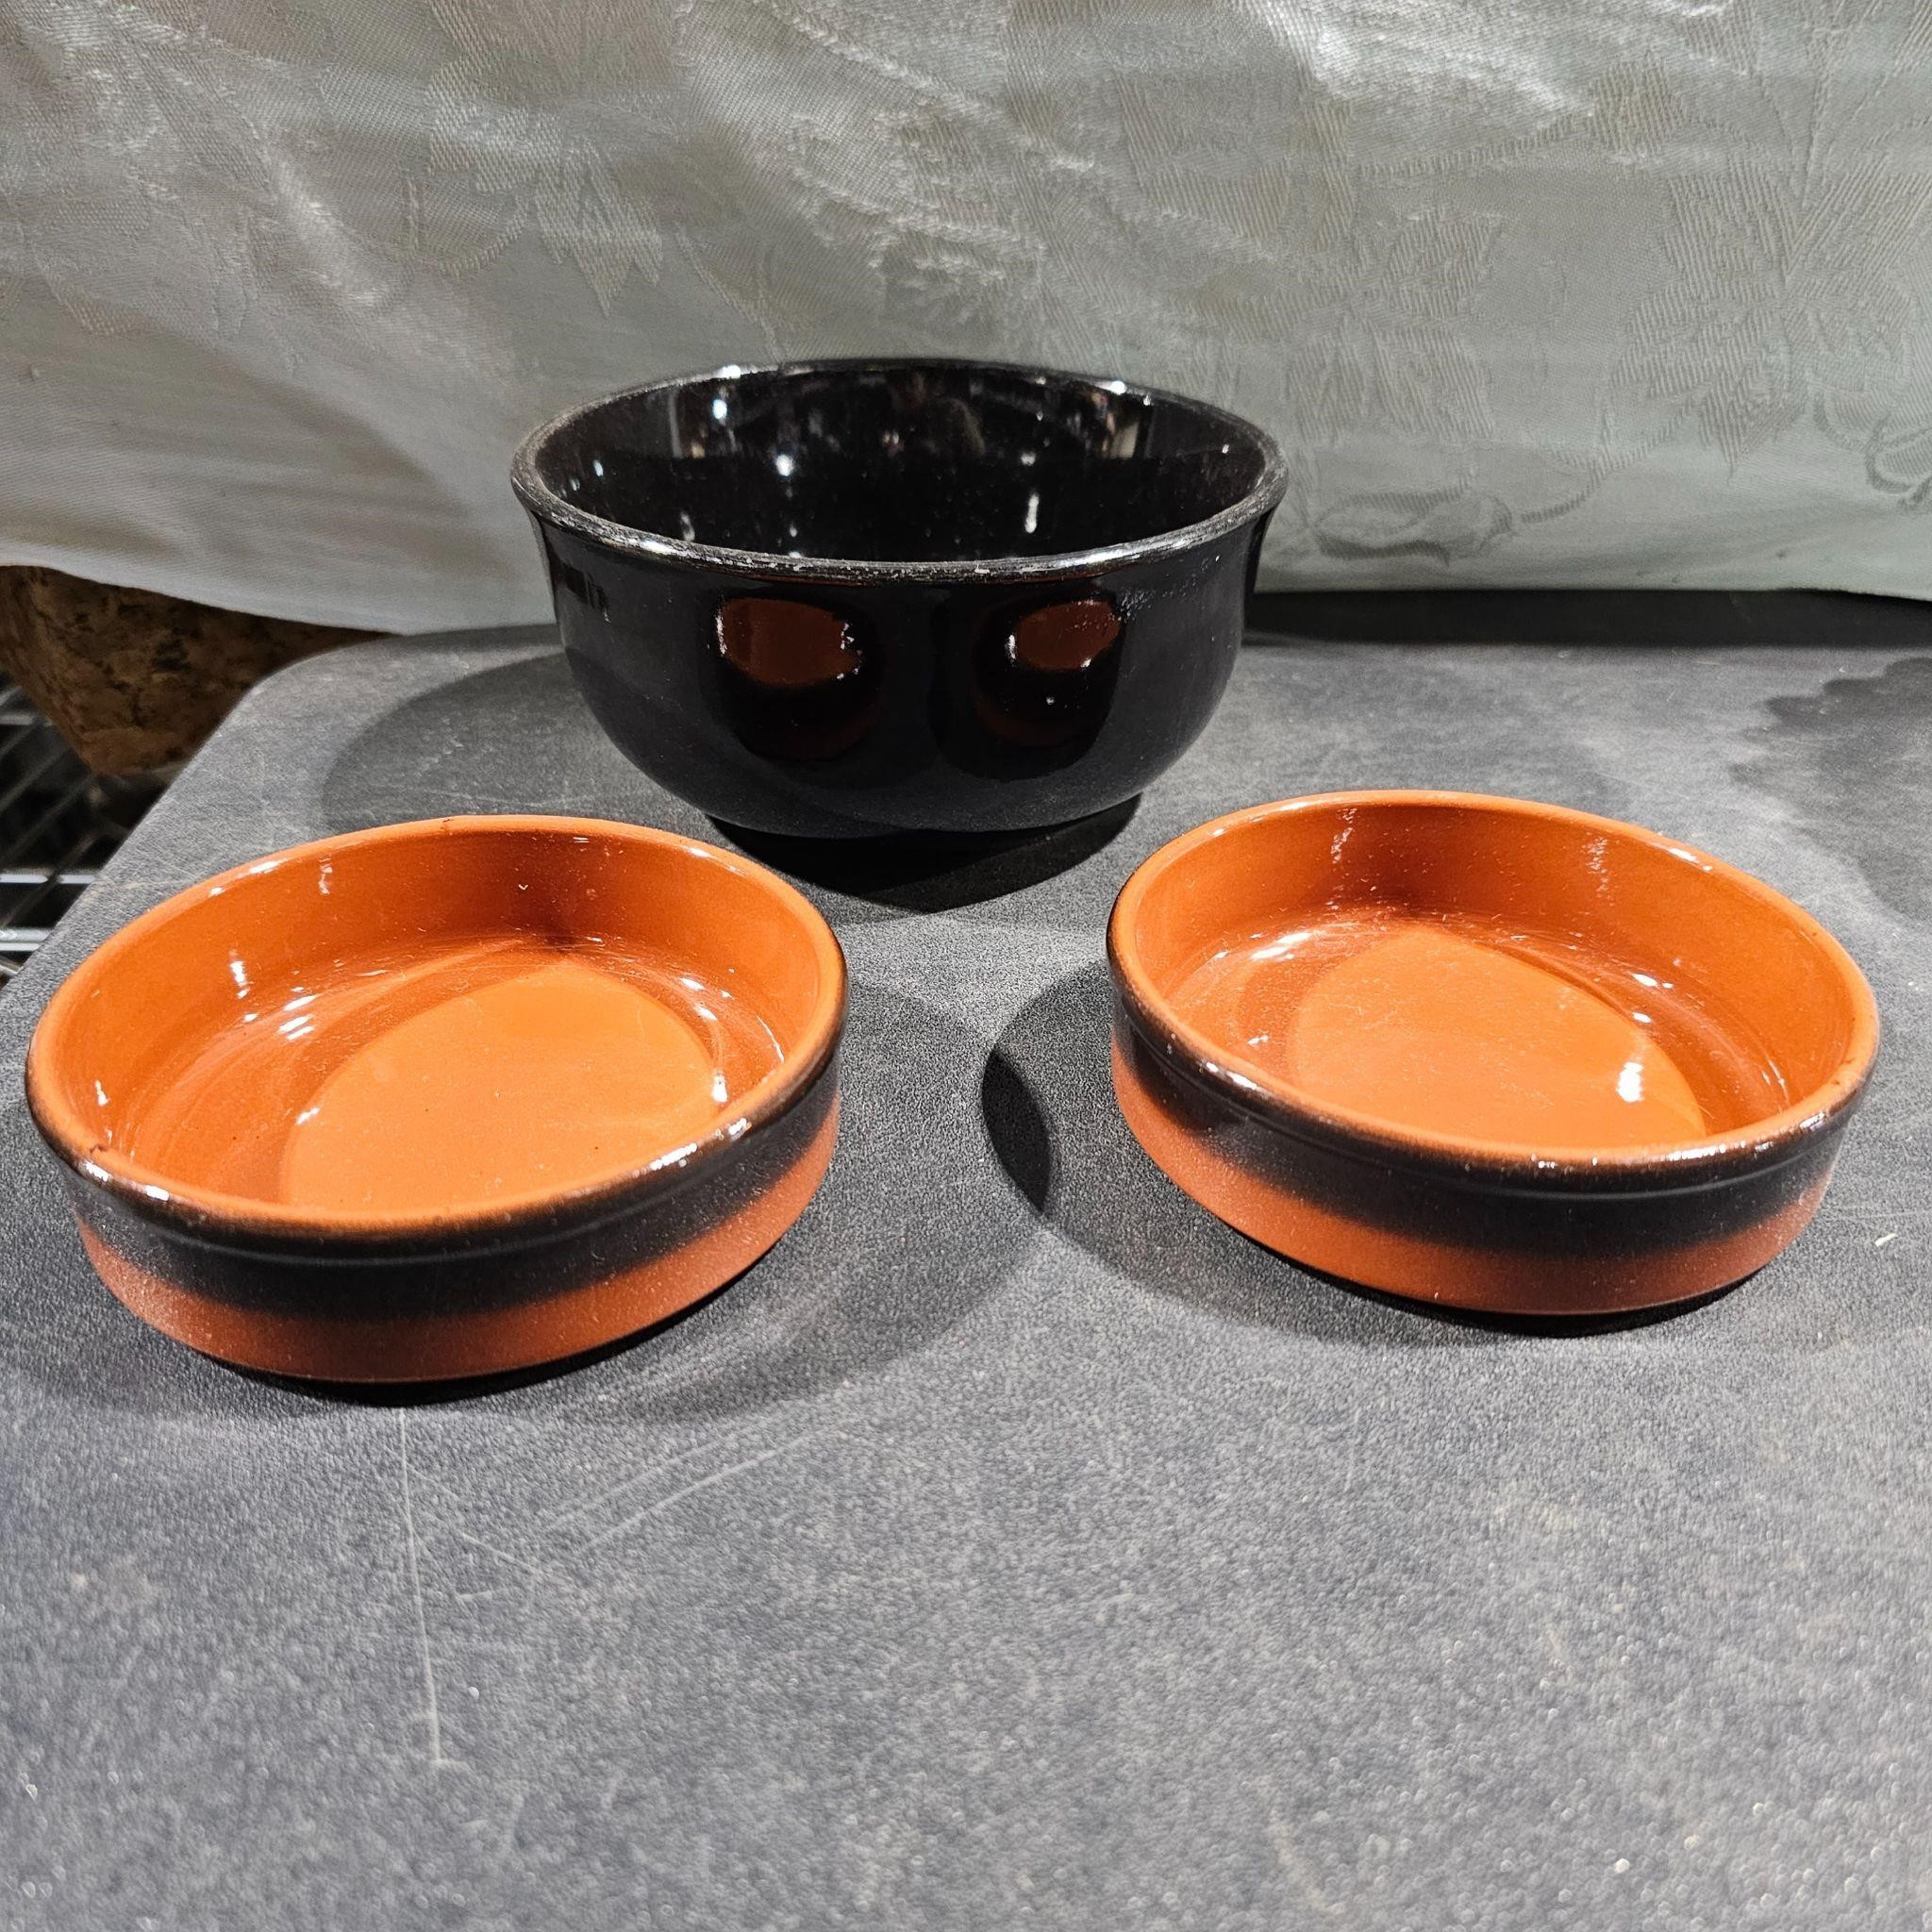 3 pottery dishes